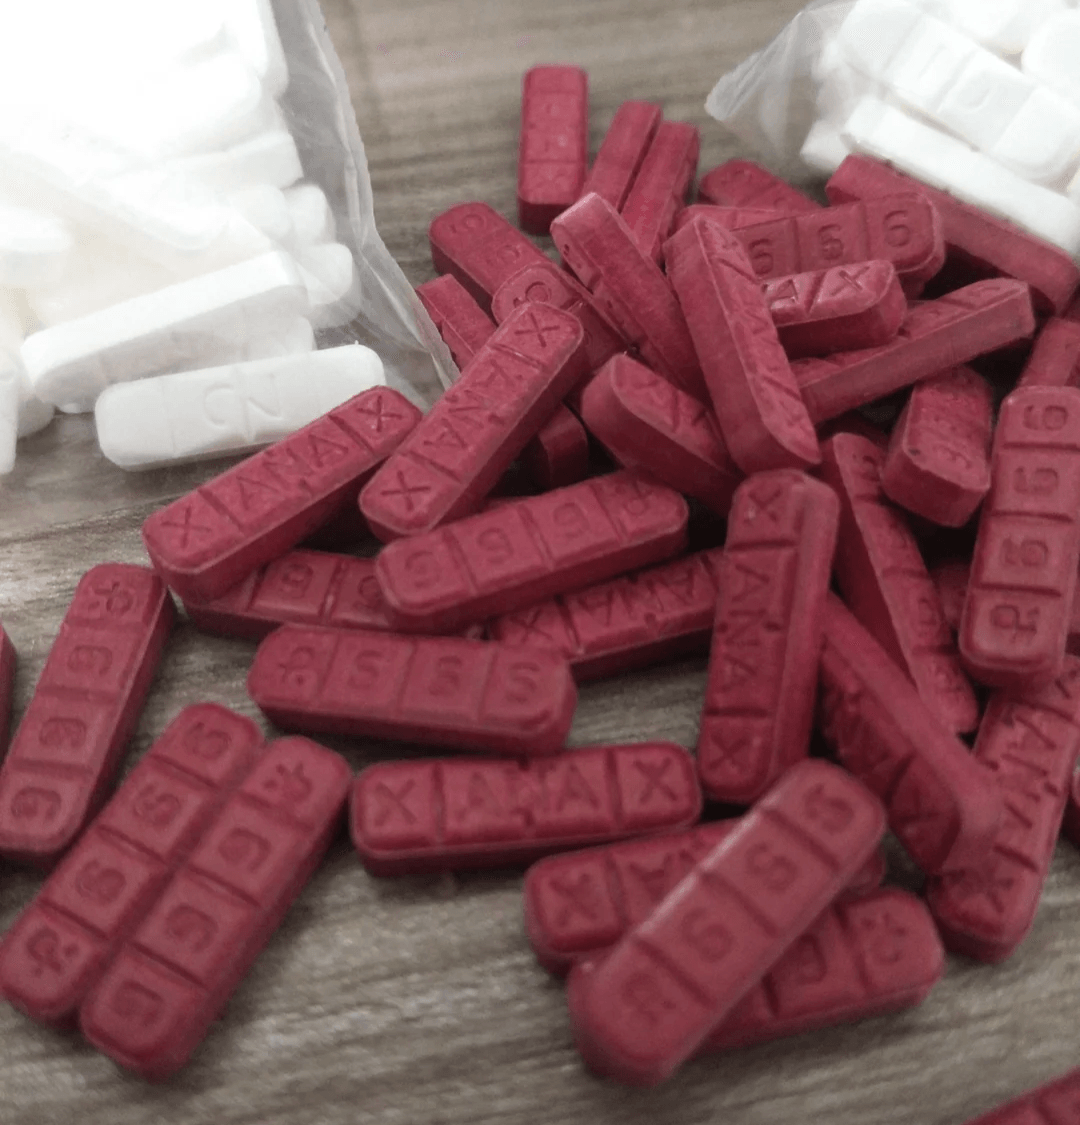 Red Xanax